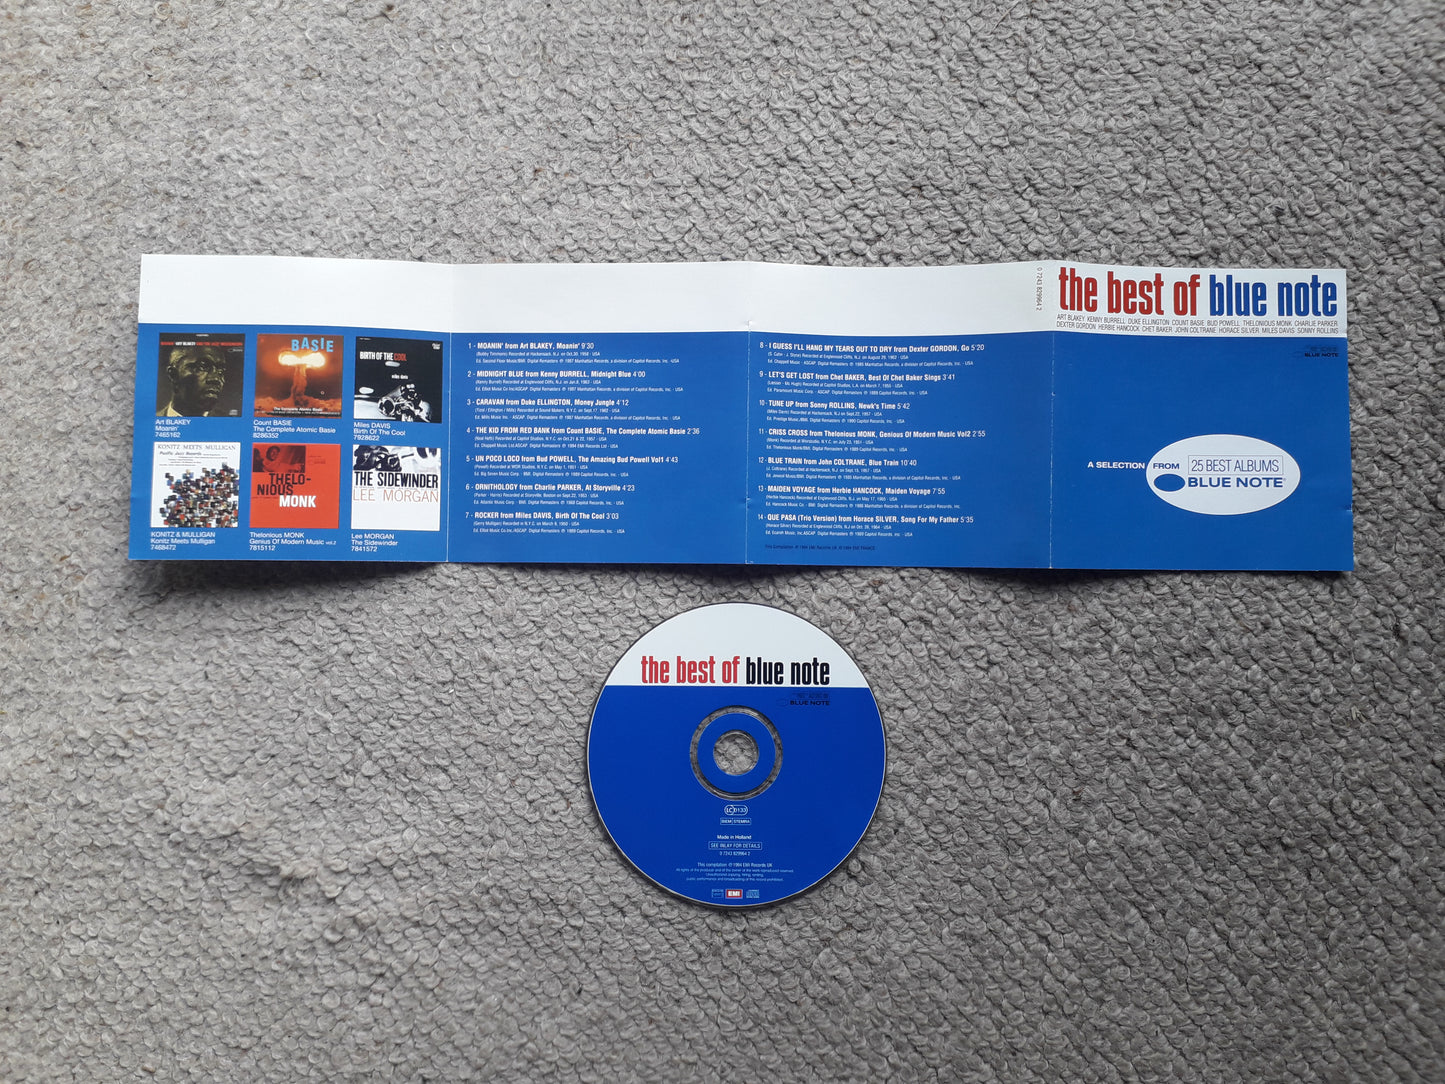 The Best Of Blue Note CD (0 7243 829964 2)